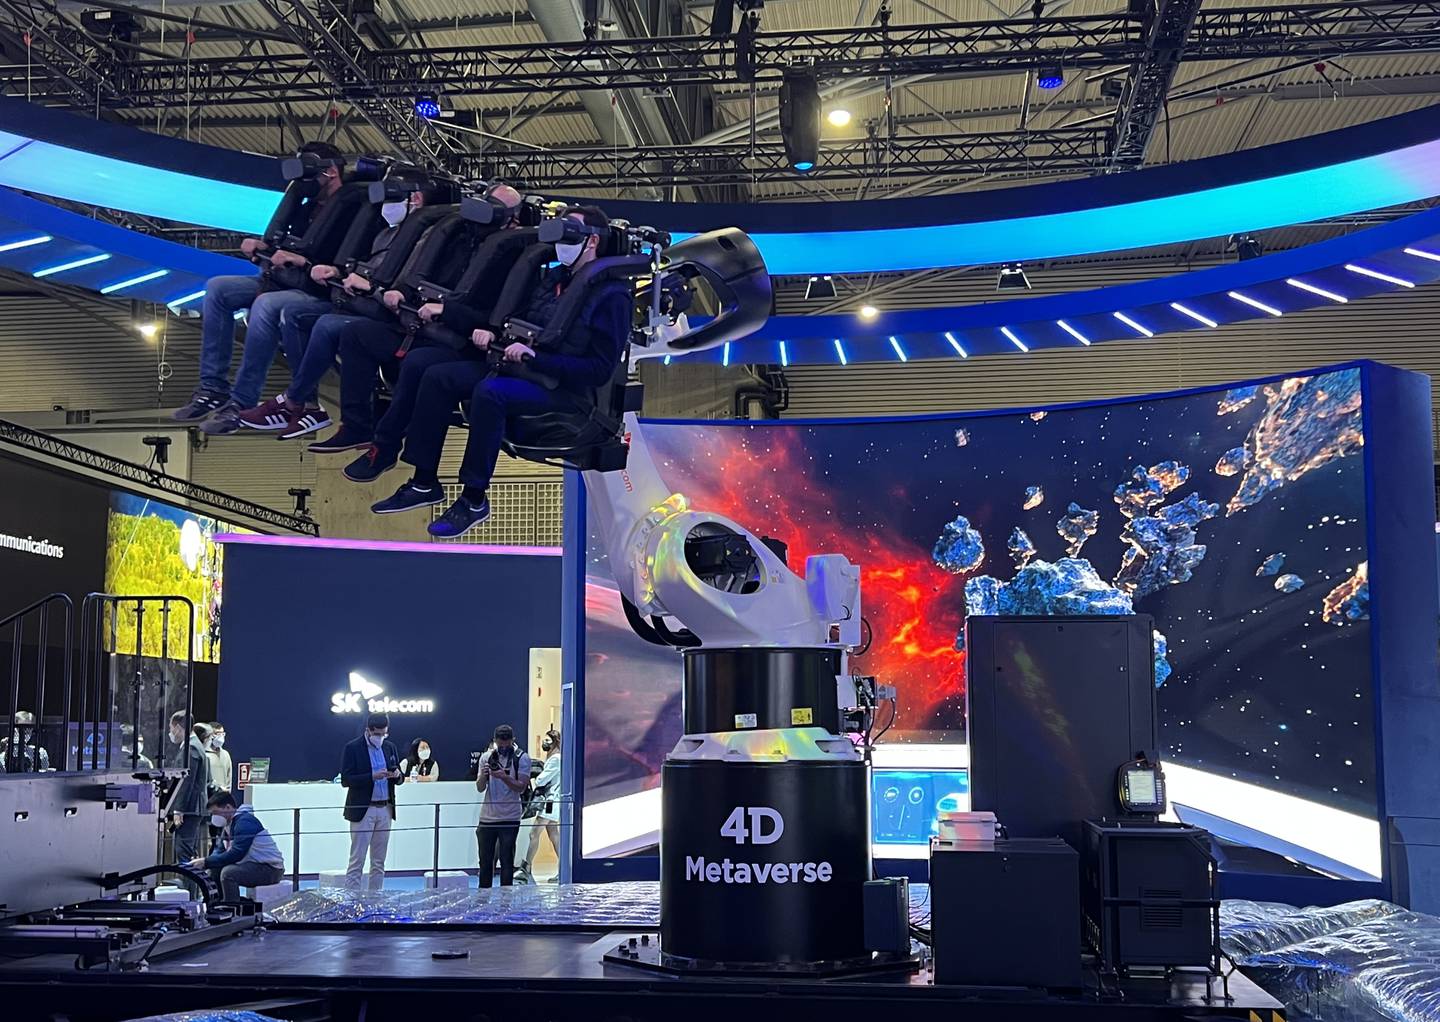 An amusement ride using 4D metaverse technology at the SK Telecom stand during Mobile World Congress 2022 in Barcelona. Alvin R. Cabral / The National